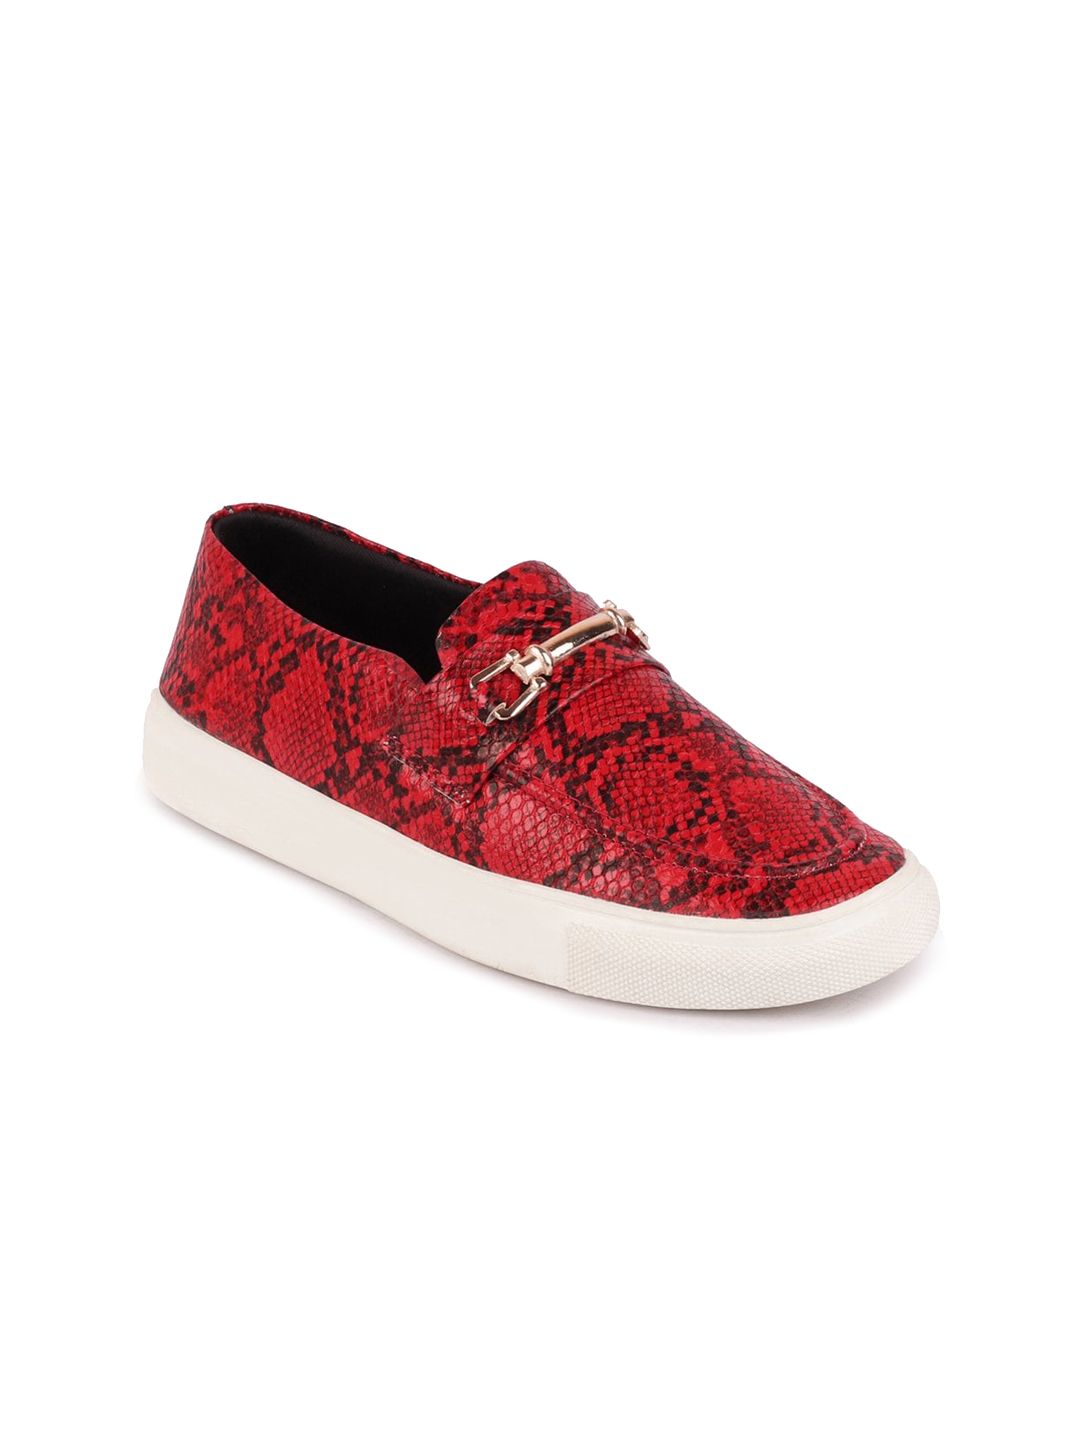 FAUSTO Women Red Woven Design PU Slip-On Sneakers Price in India